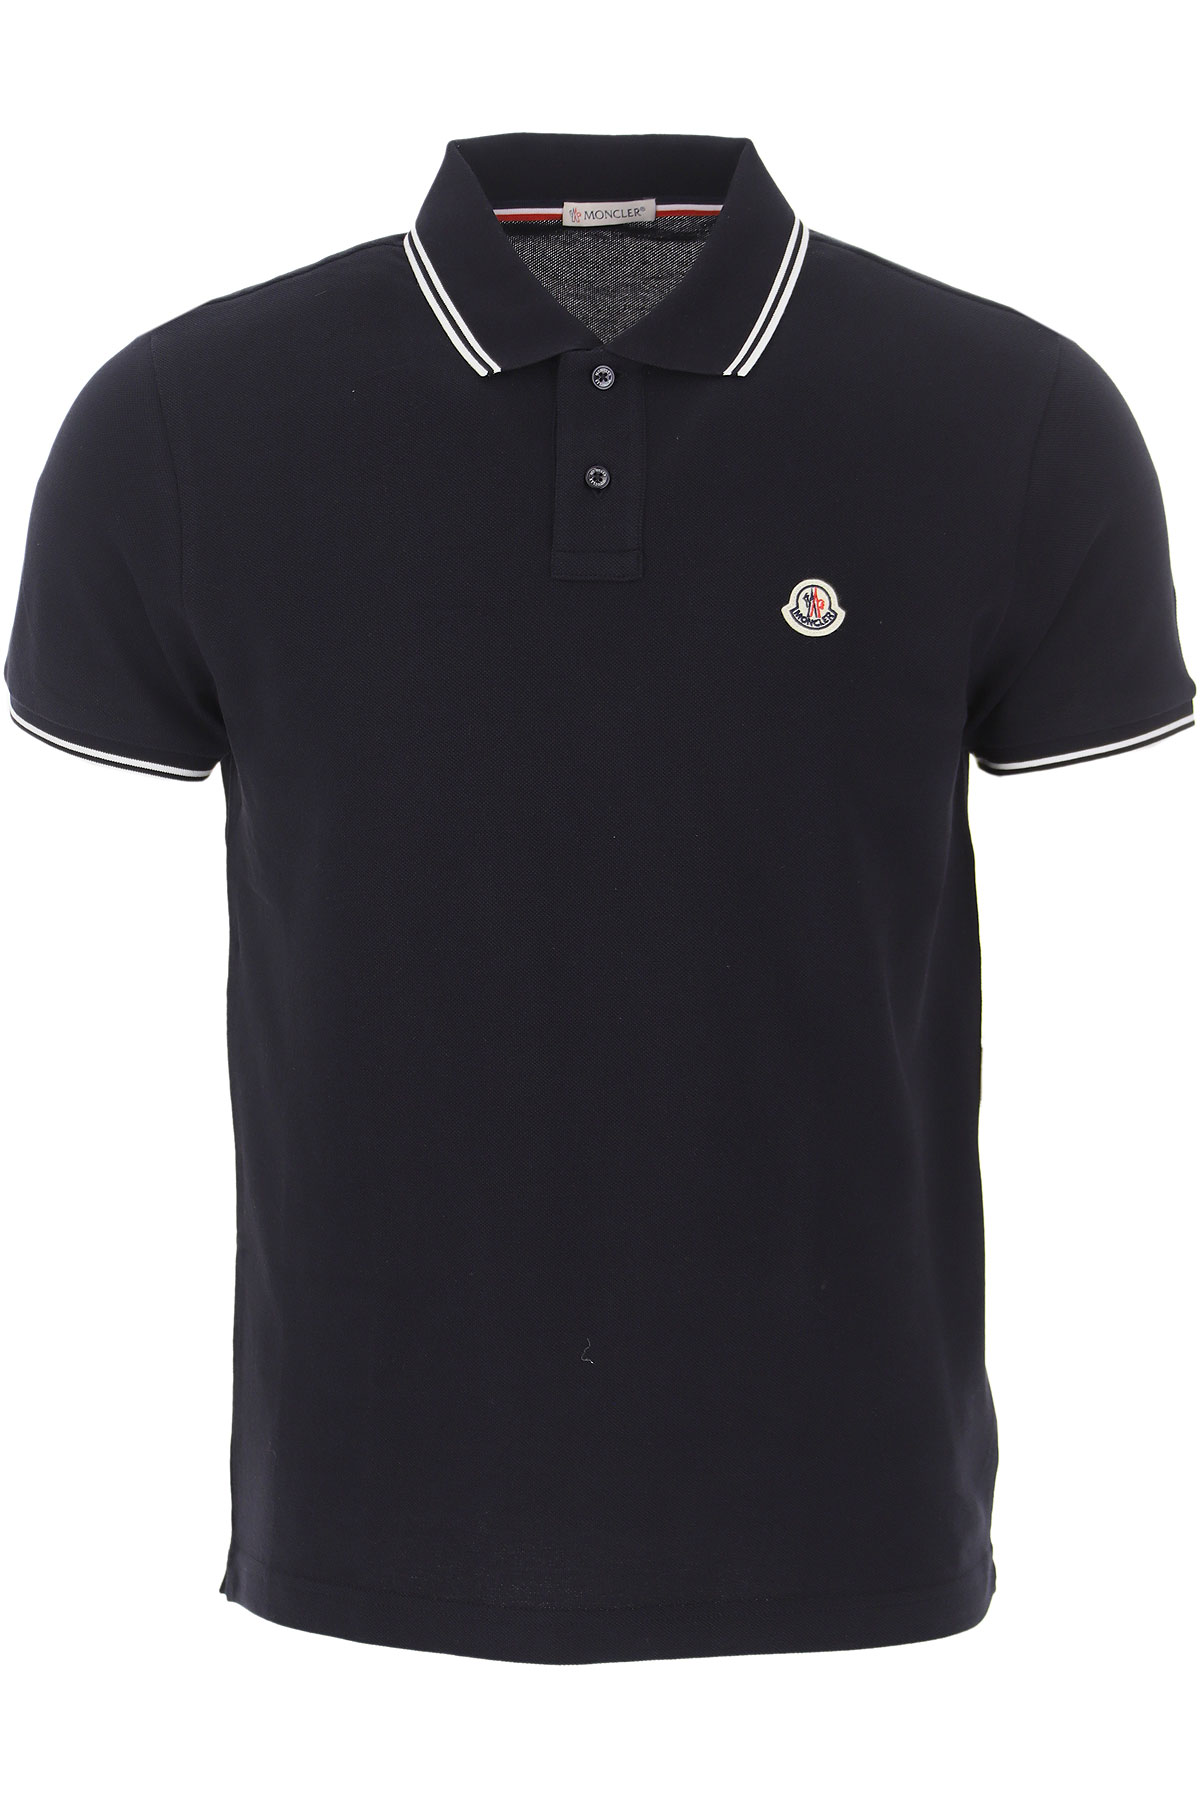 Mens Clothing Moncler, Style code: 8a7060084556-773-